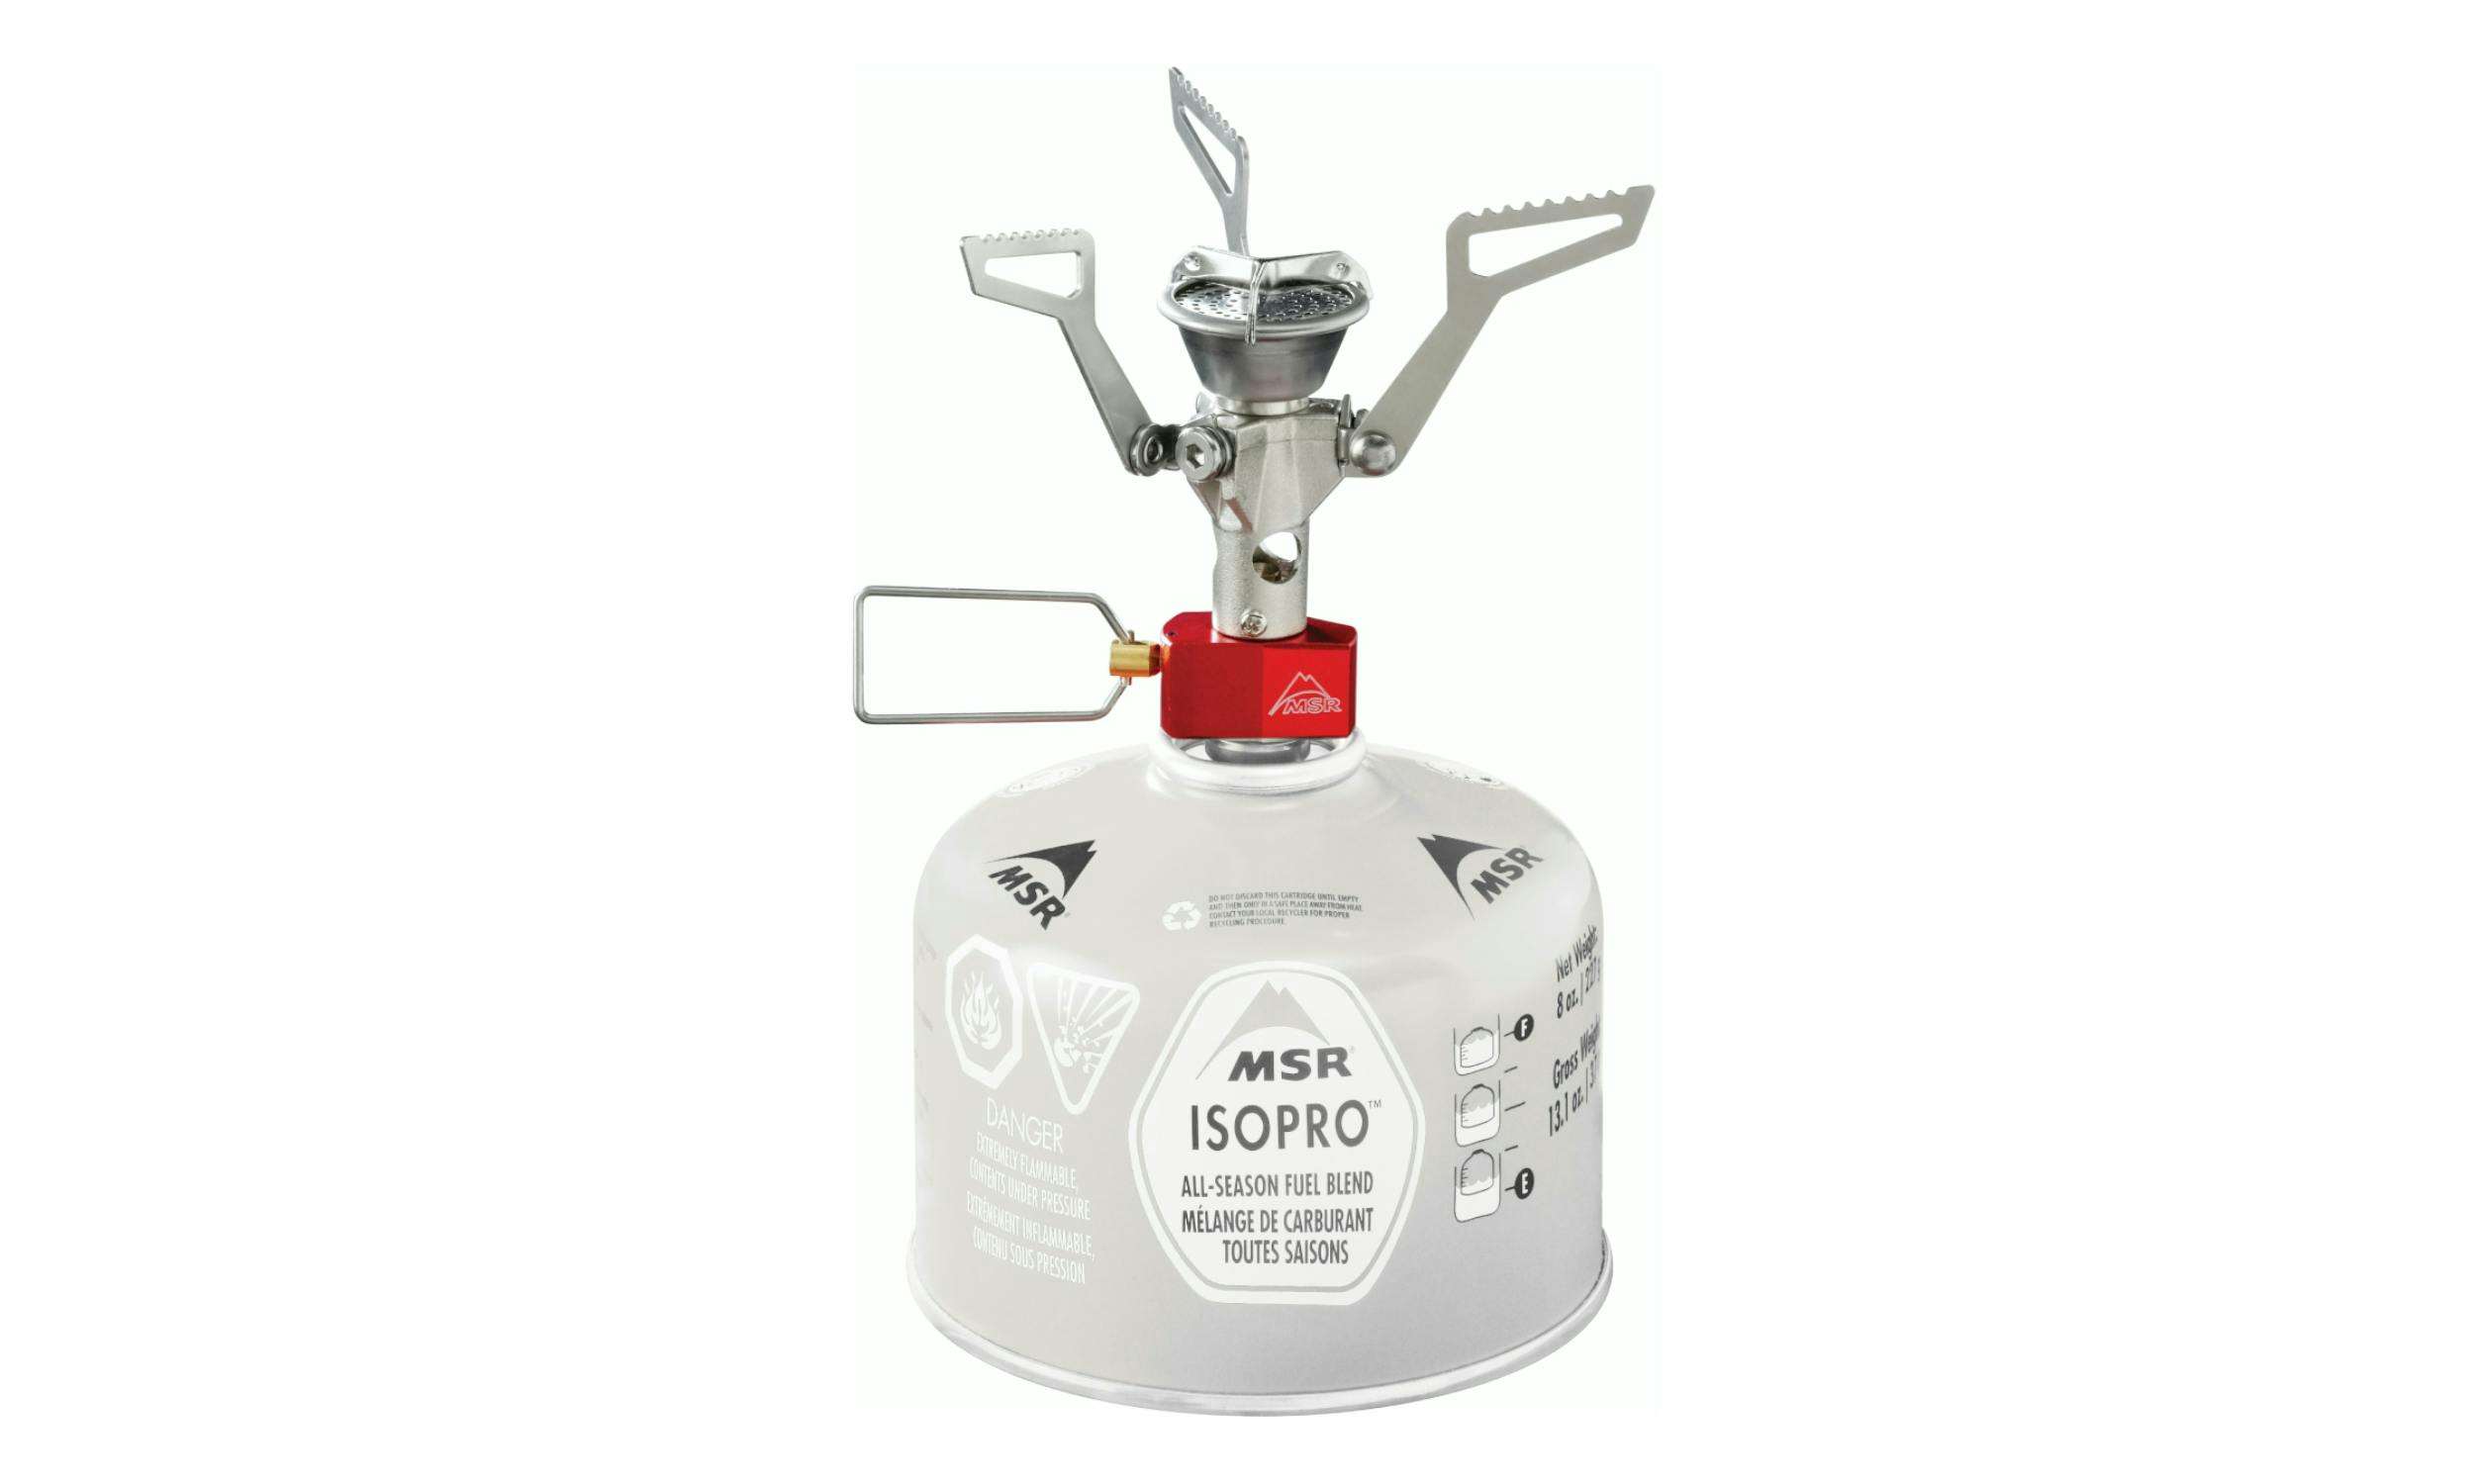 MSR camp stove for backcountry use